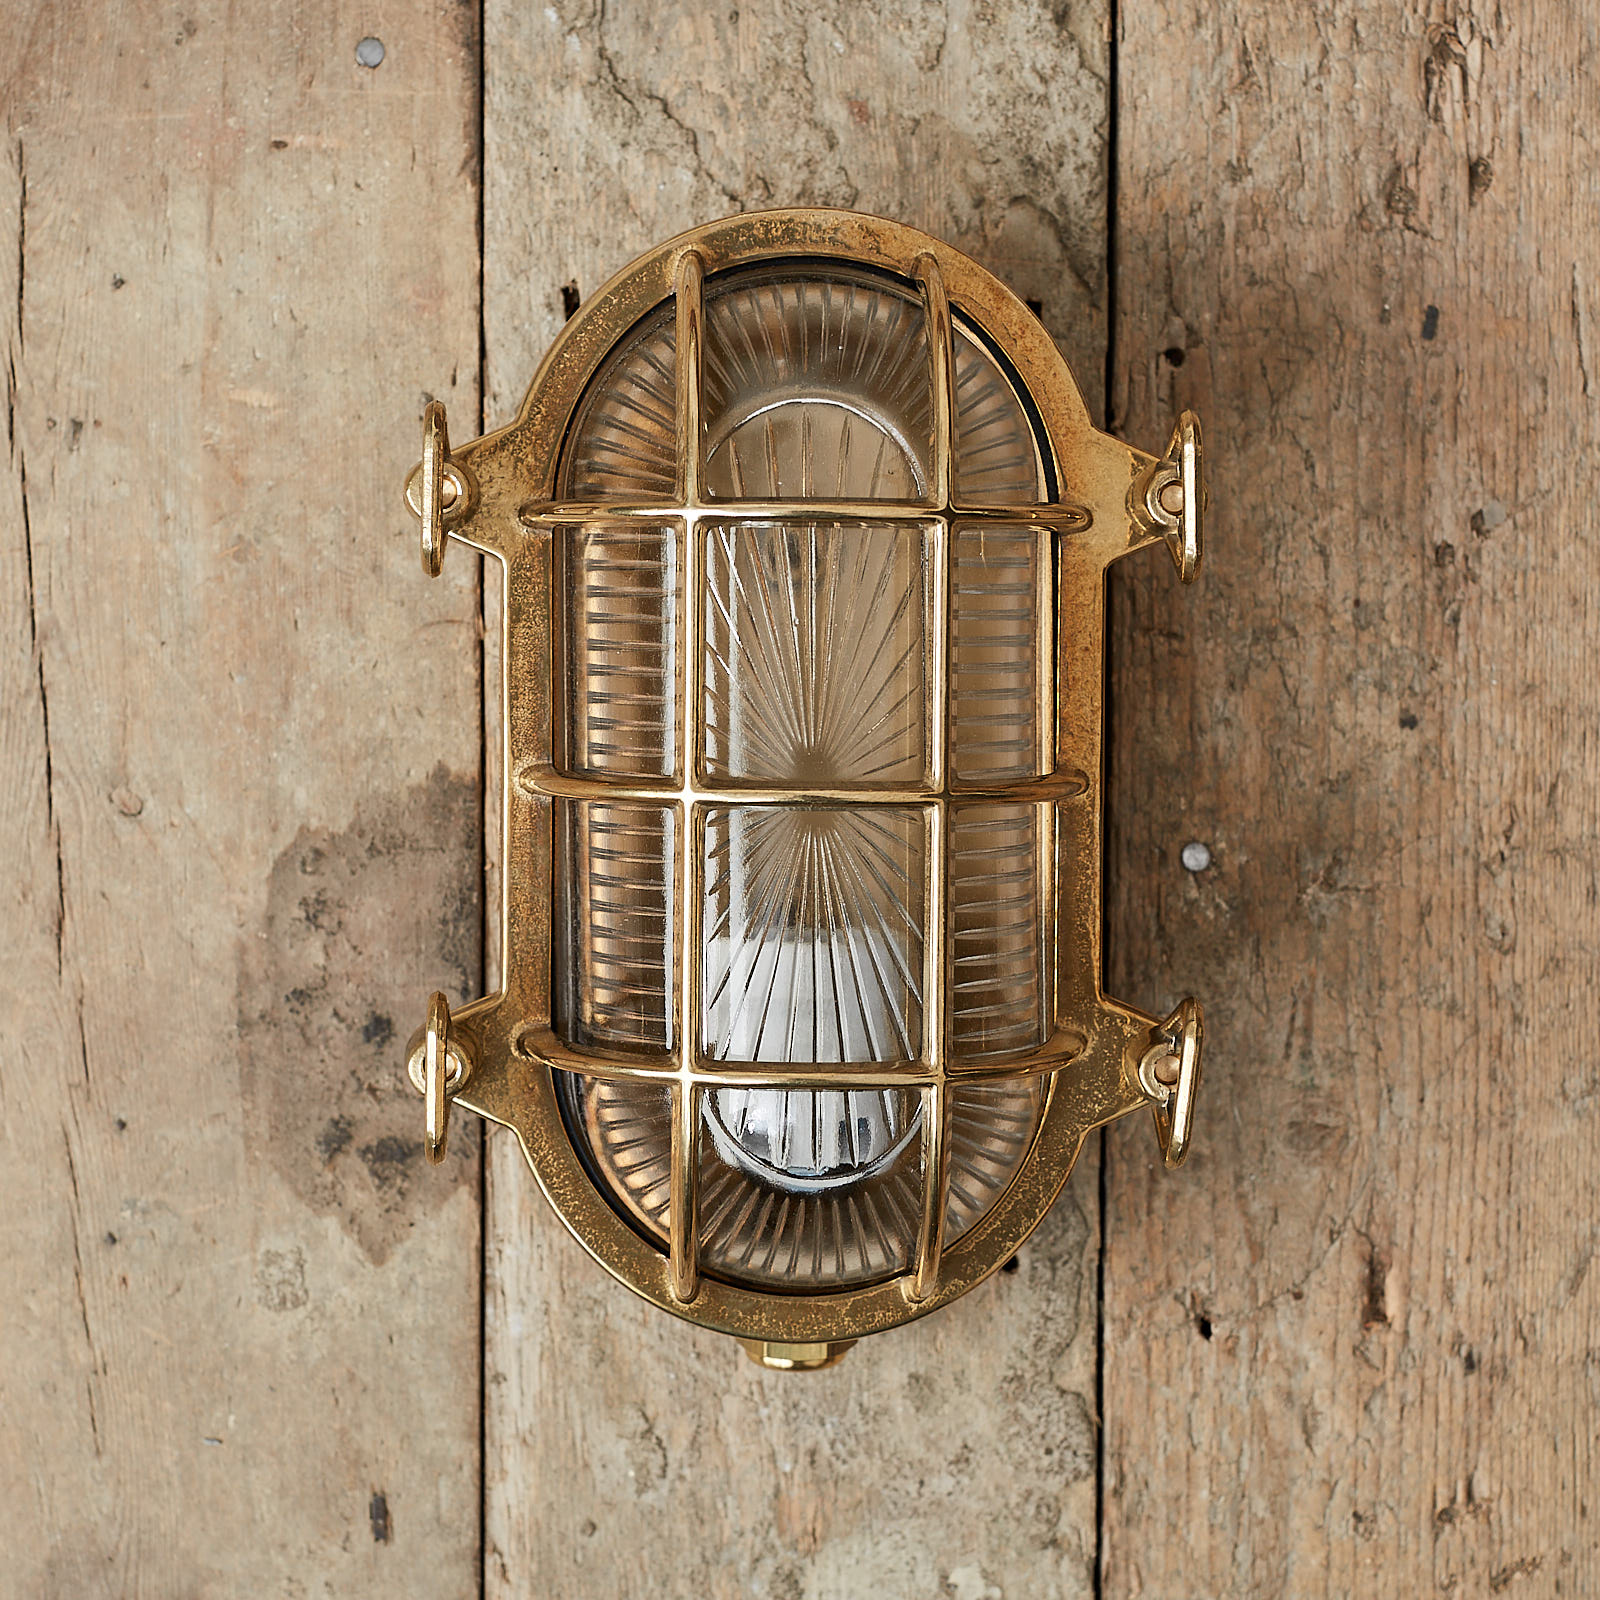 A polished brass bulkhead light, - LASSCO - England's prime resource for  Architectural Antiques, Salvage Curiosities